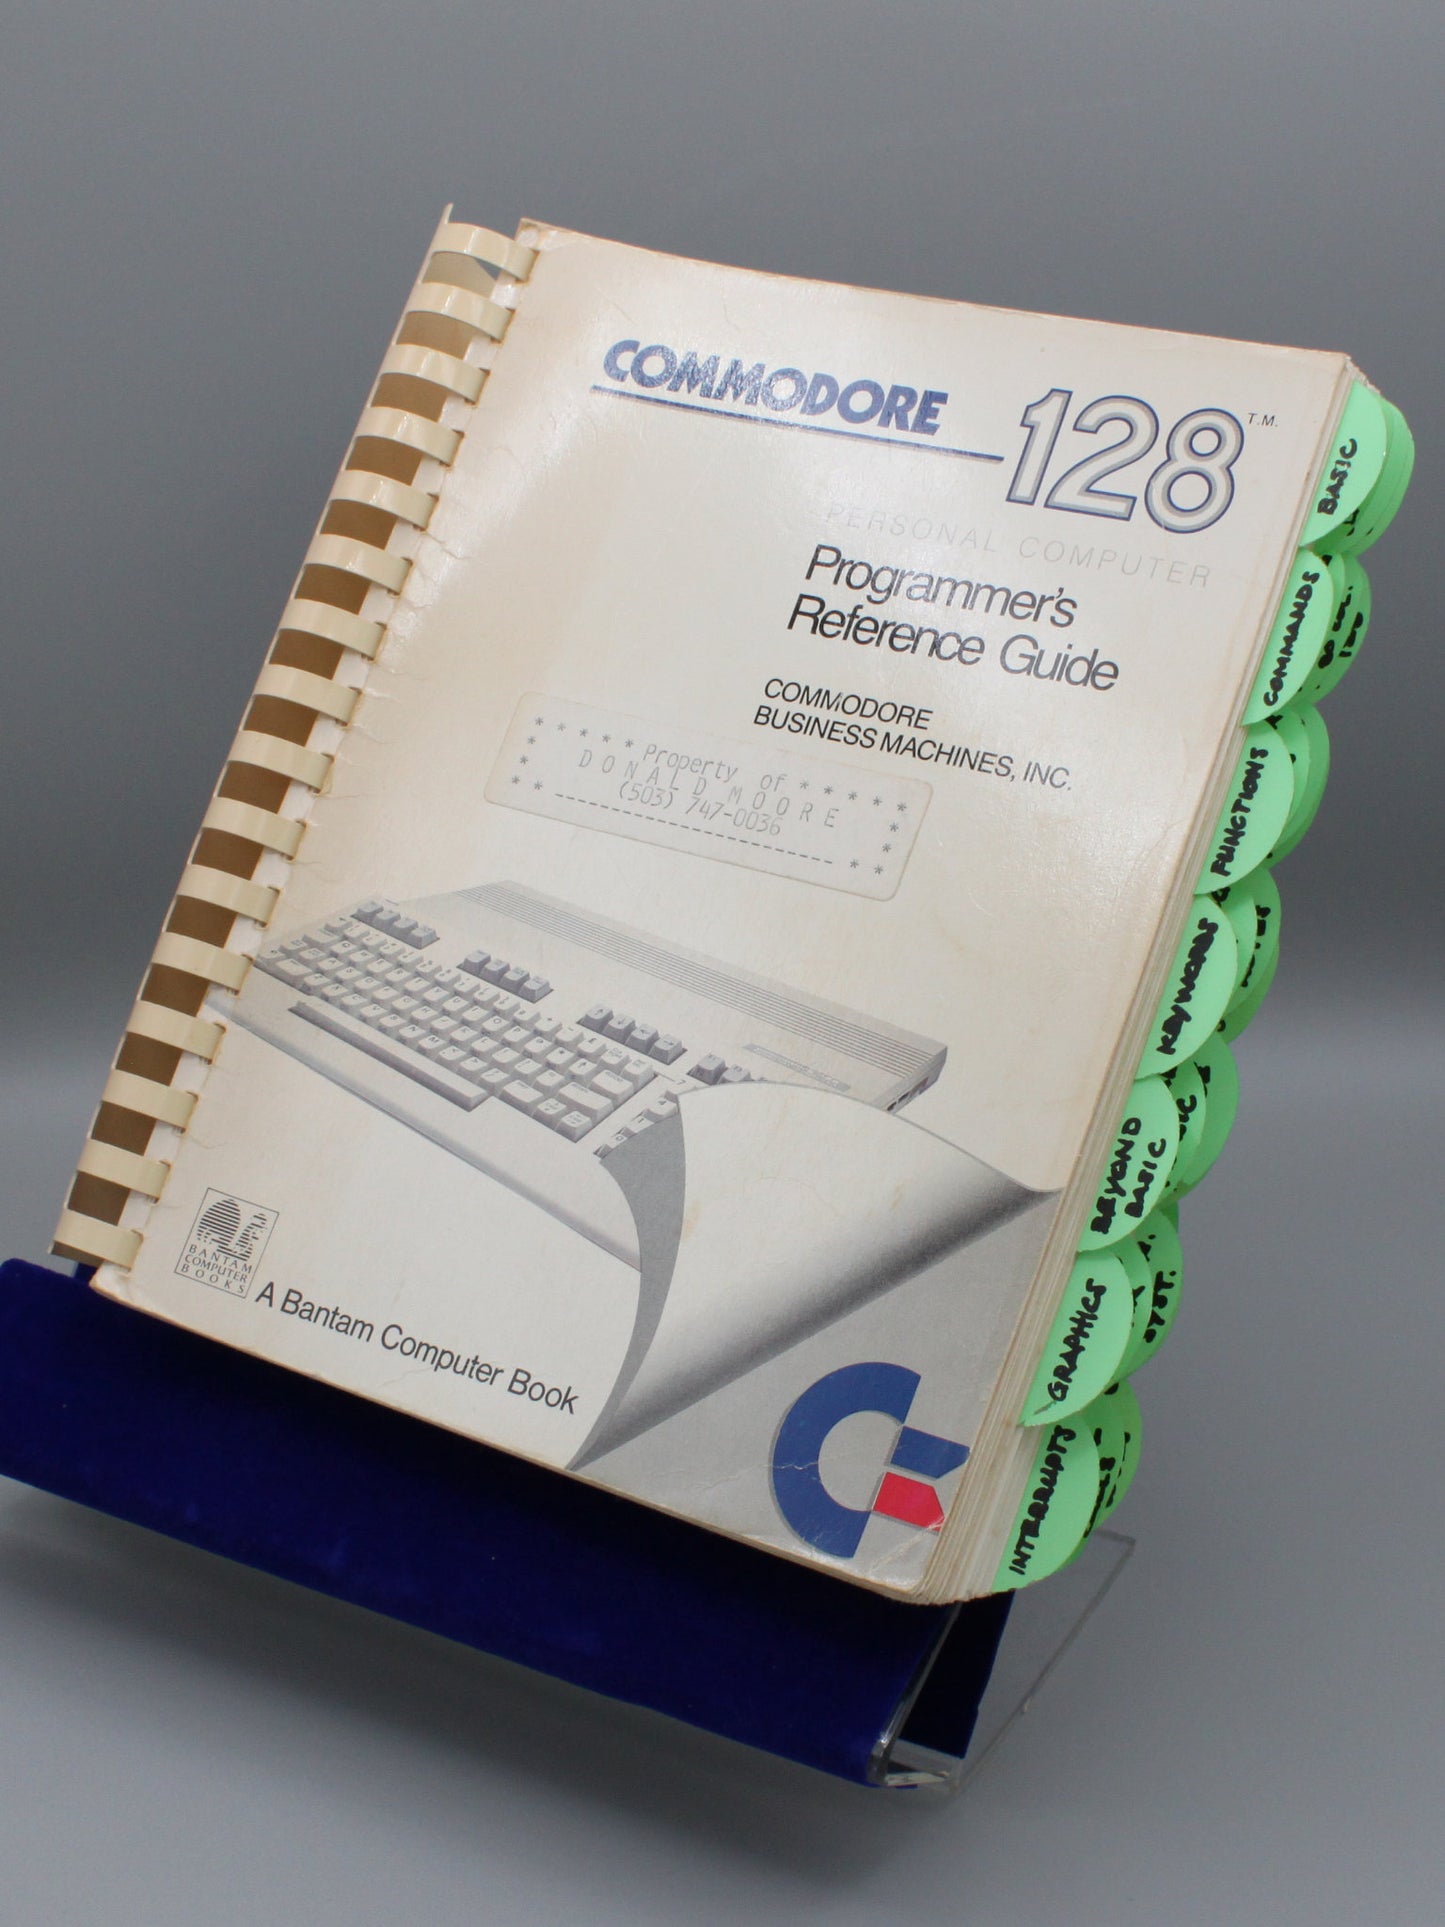 Commodore 128 Programmer's Reference Guide